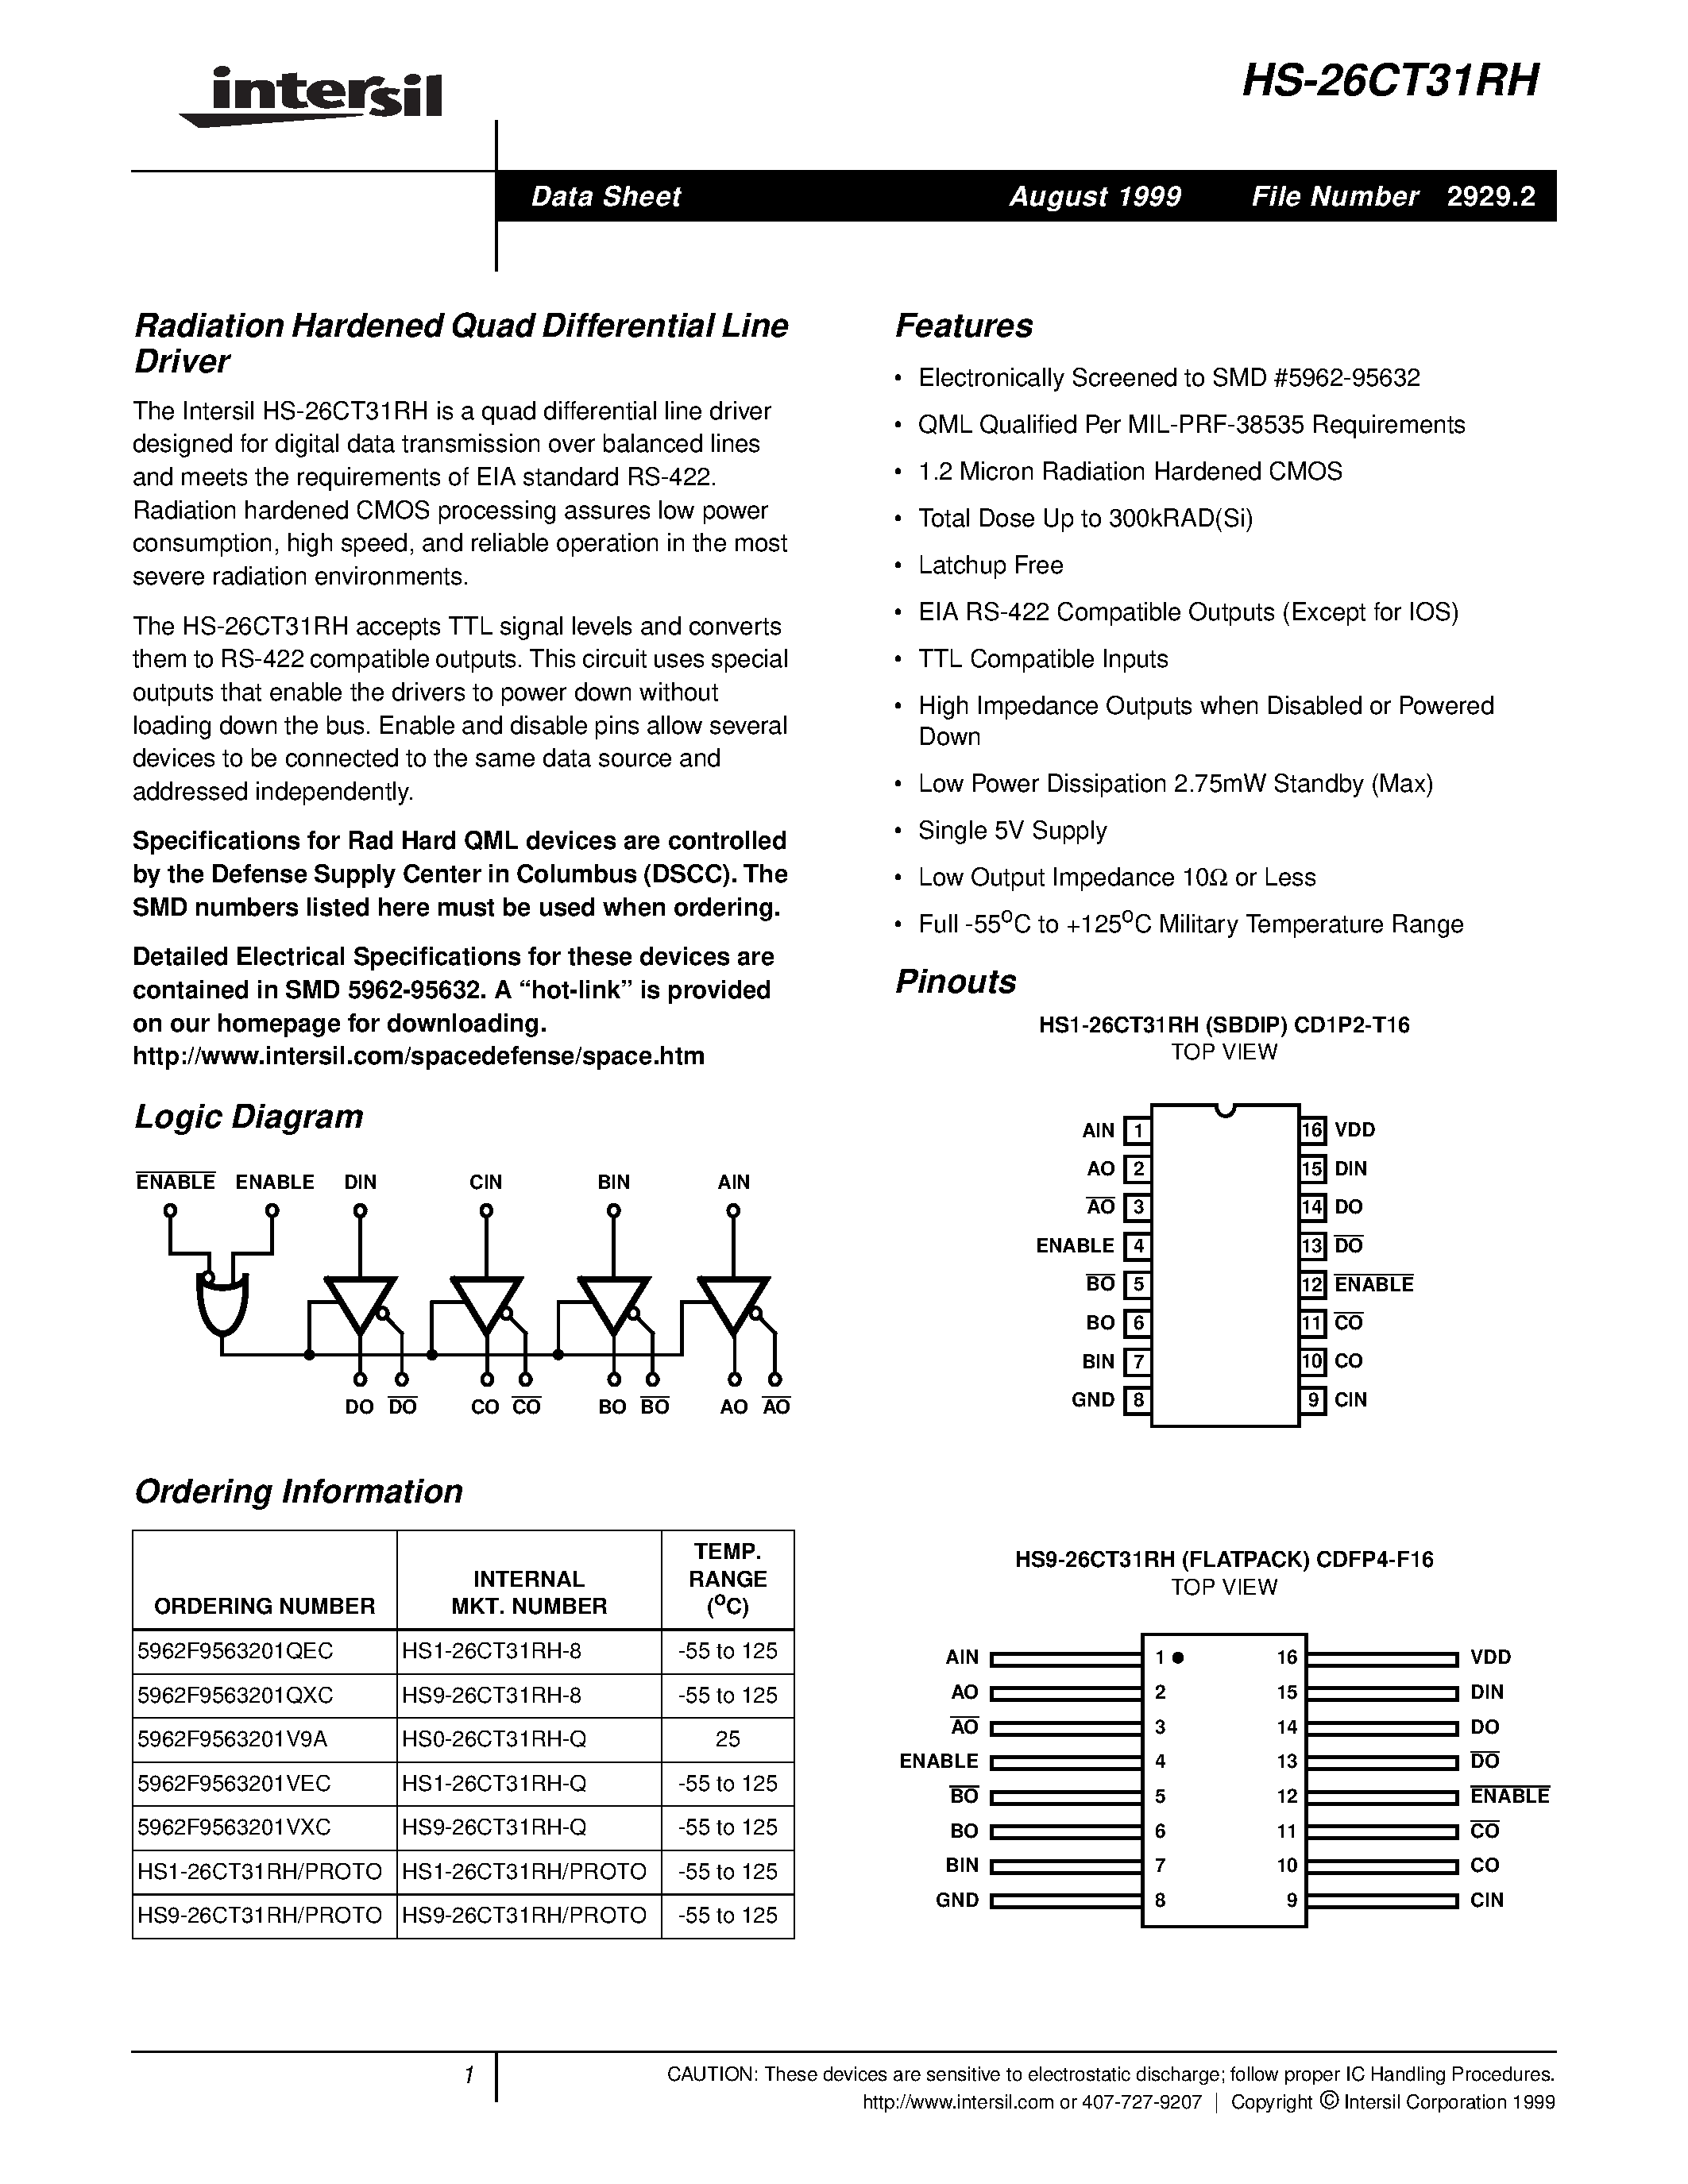 Datasheet HS0-26CT31RH-Q - Radiation Hardened Quad Differential Line Driver page 1